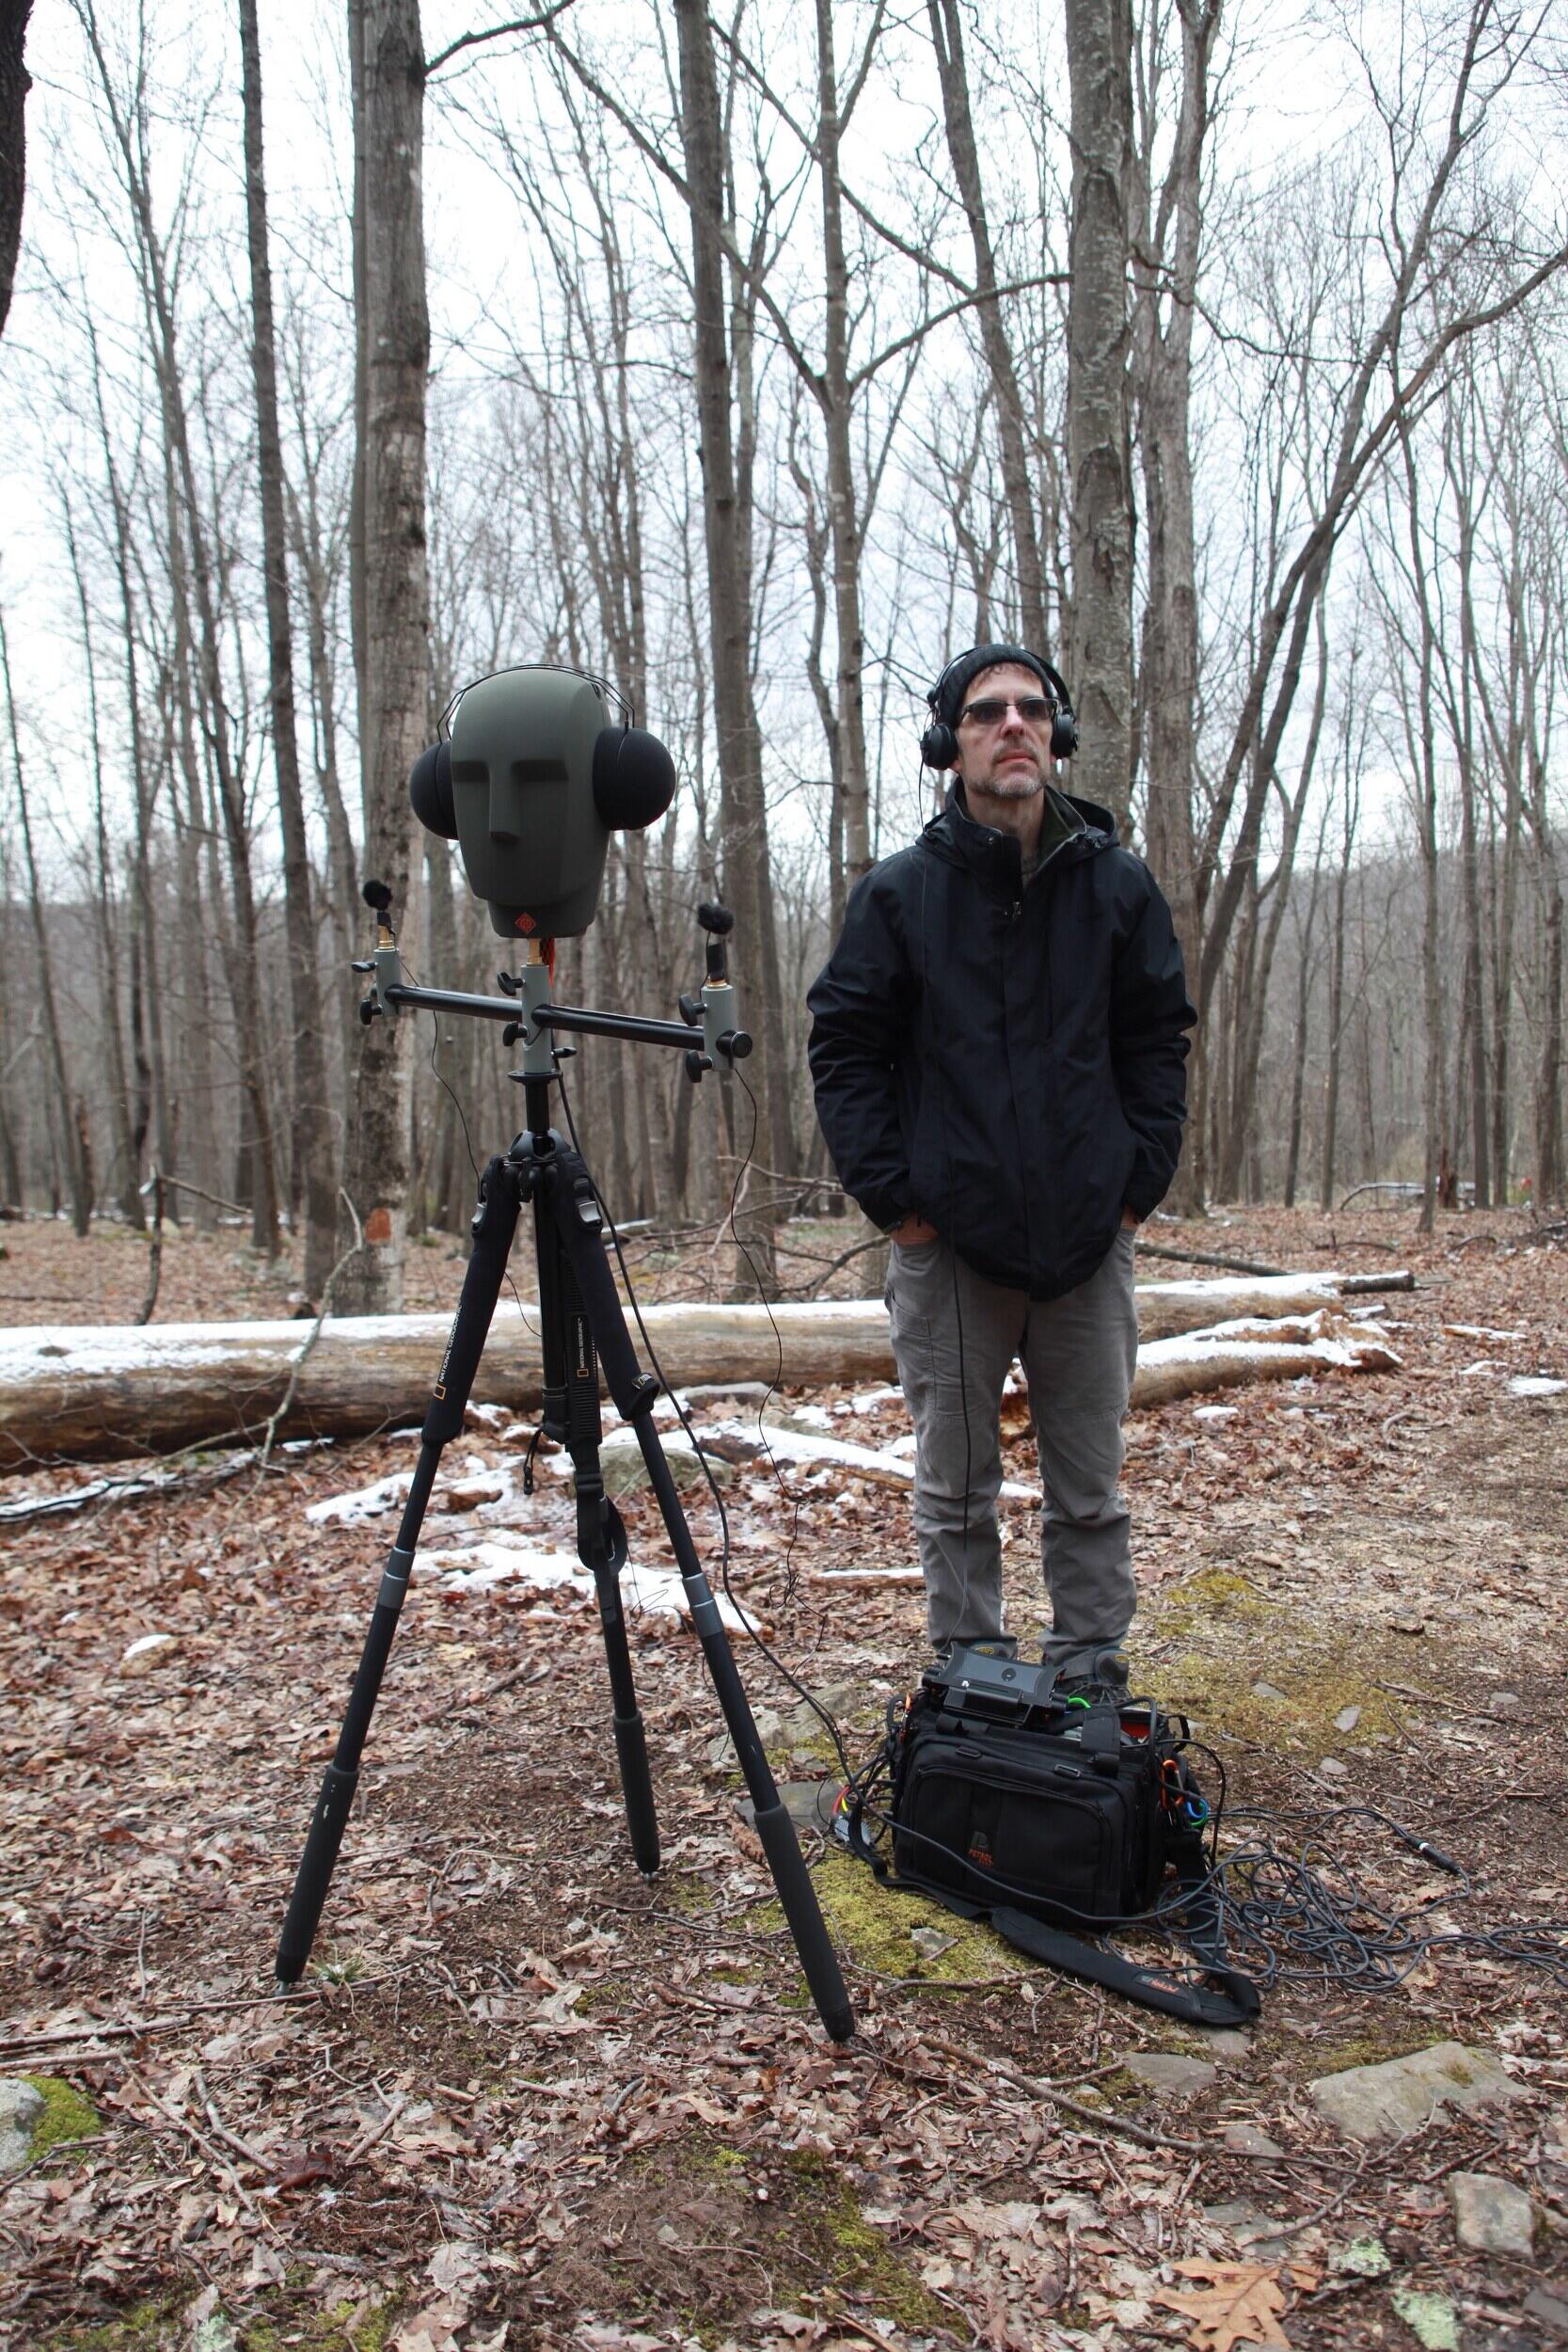 A person stands in a forest with a mannequin head wearing headphones and recording equipment.